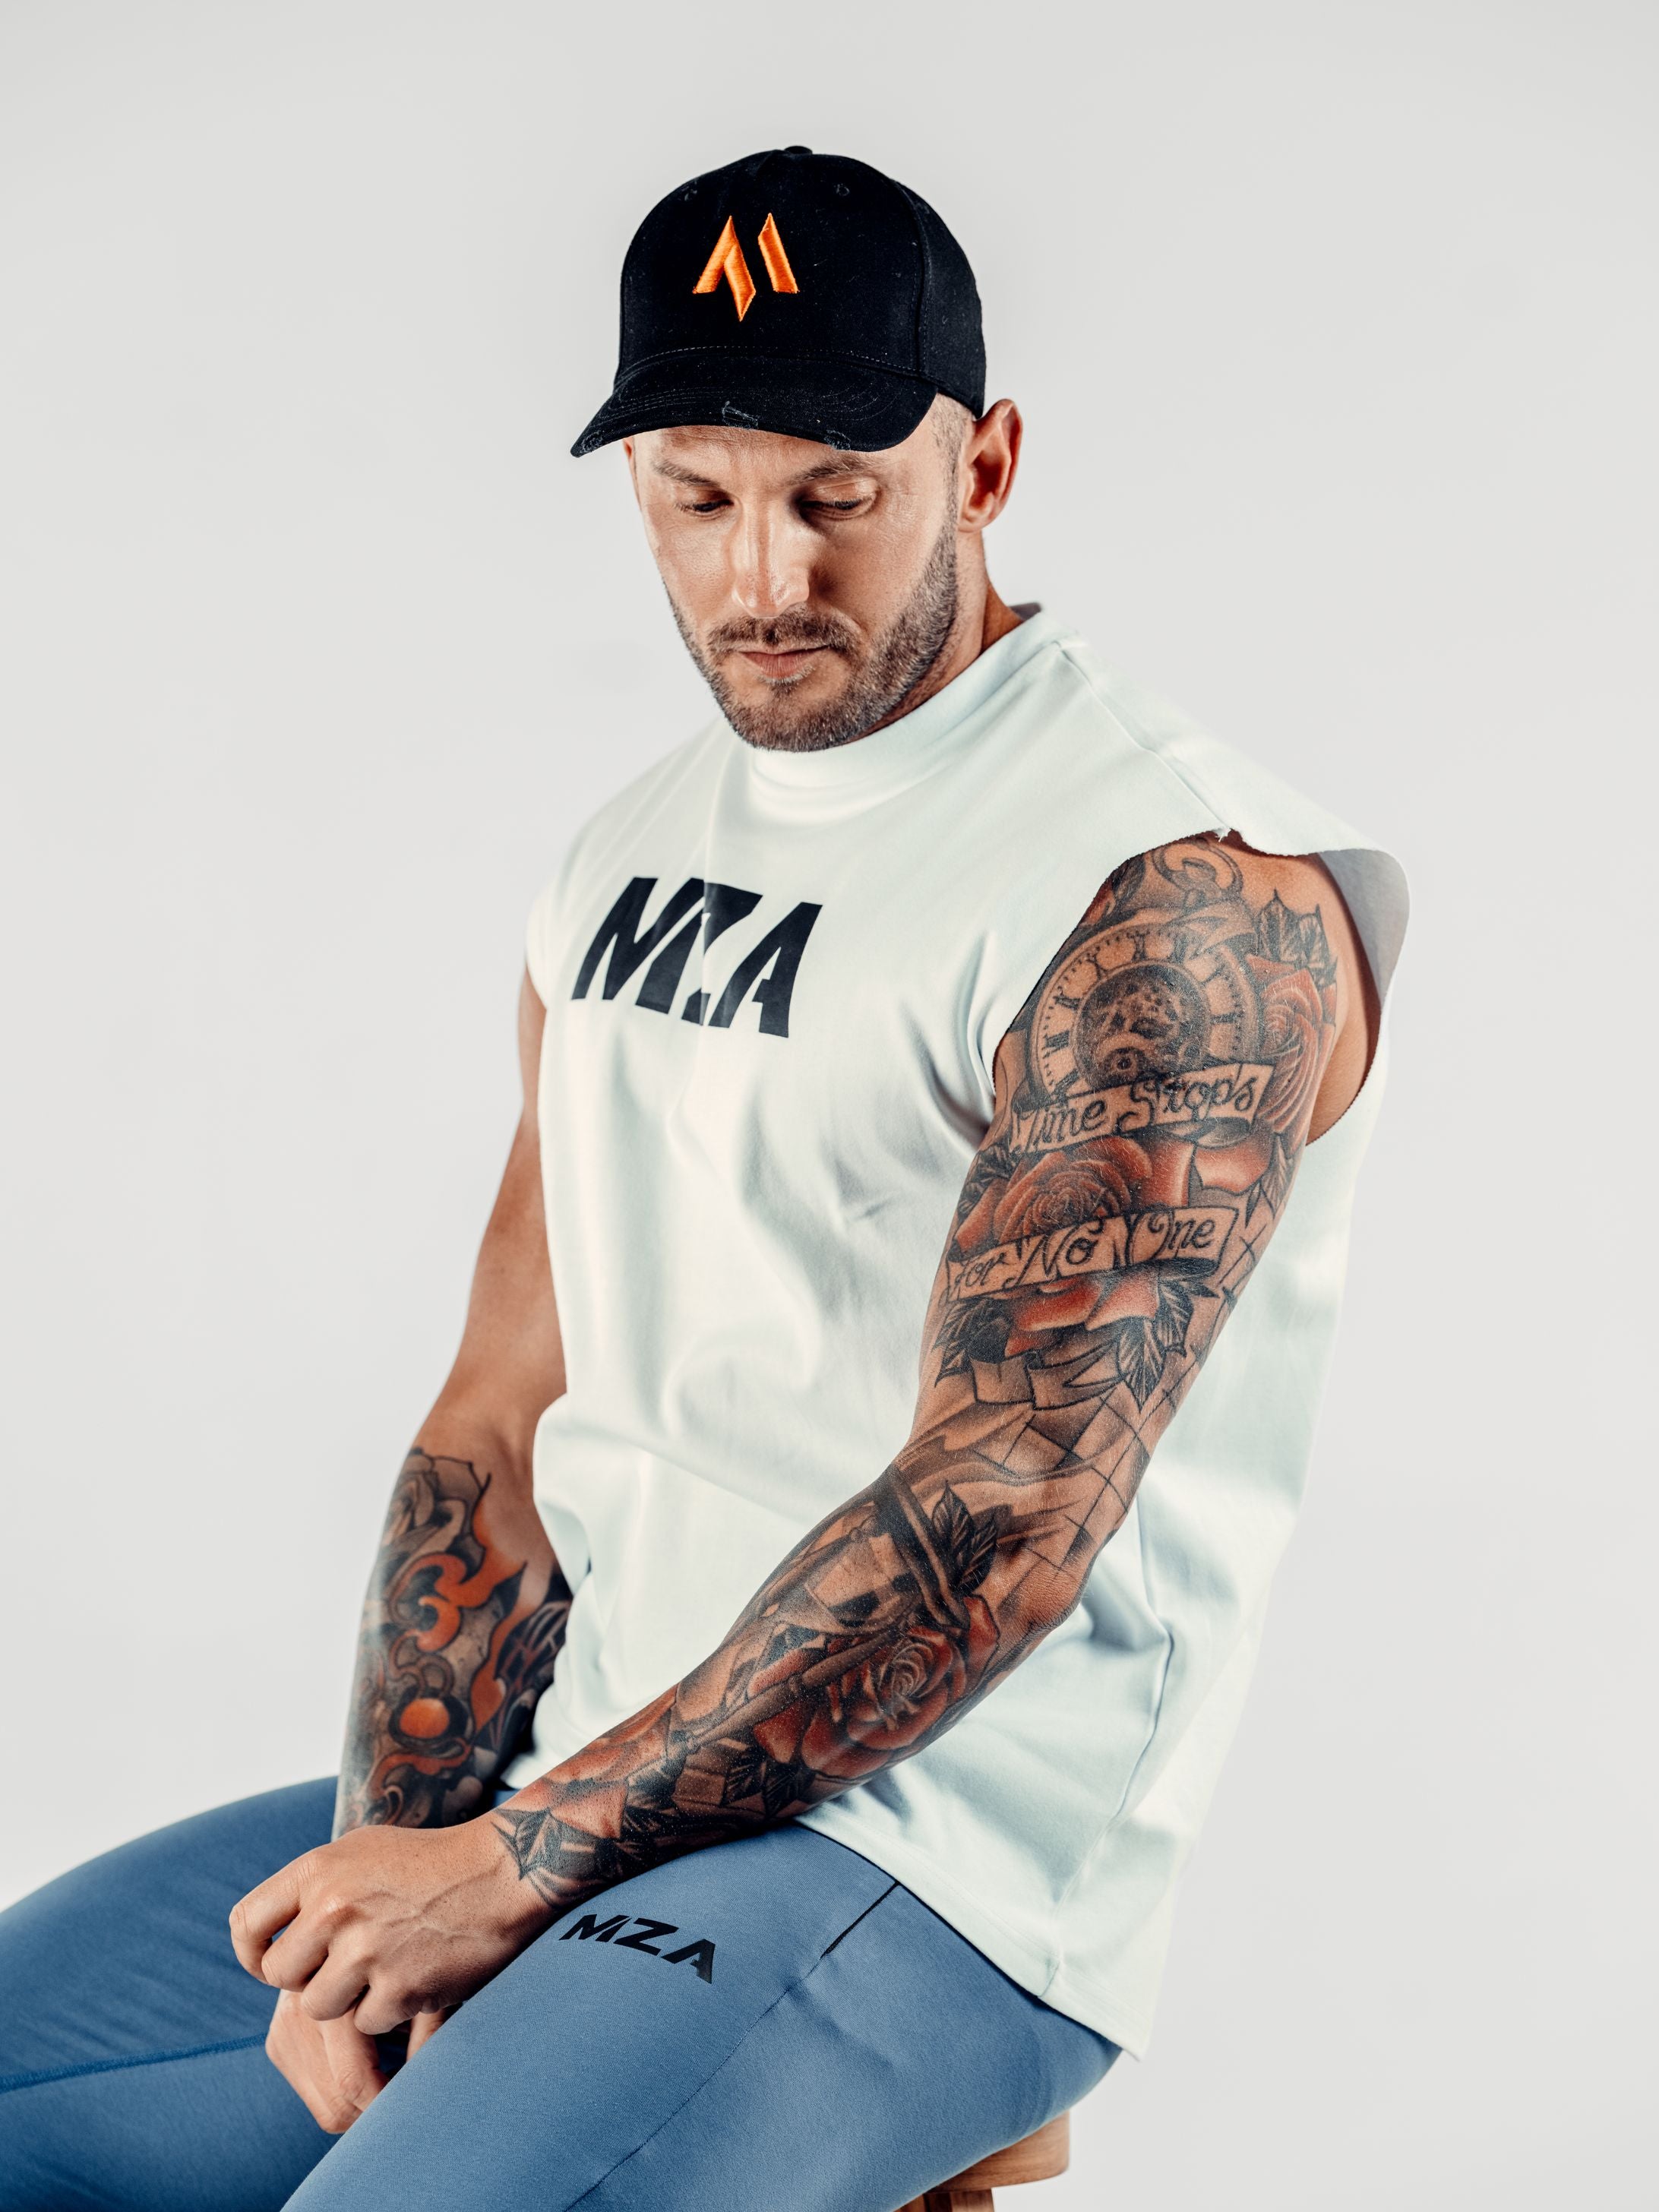 This is Shane sat on a stool facing the camera wearing the black new standard 3d distressed 5 panel black with an orange emblem.  He is wearing the new standard vest in white and the new standard joggers in blue